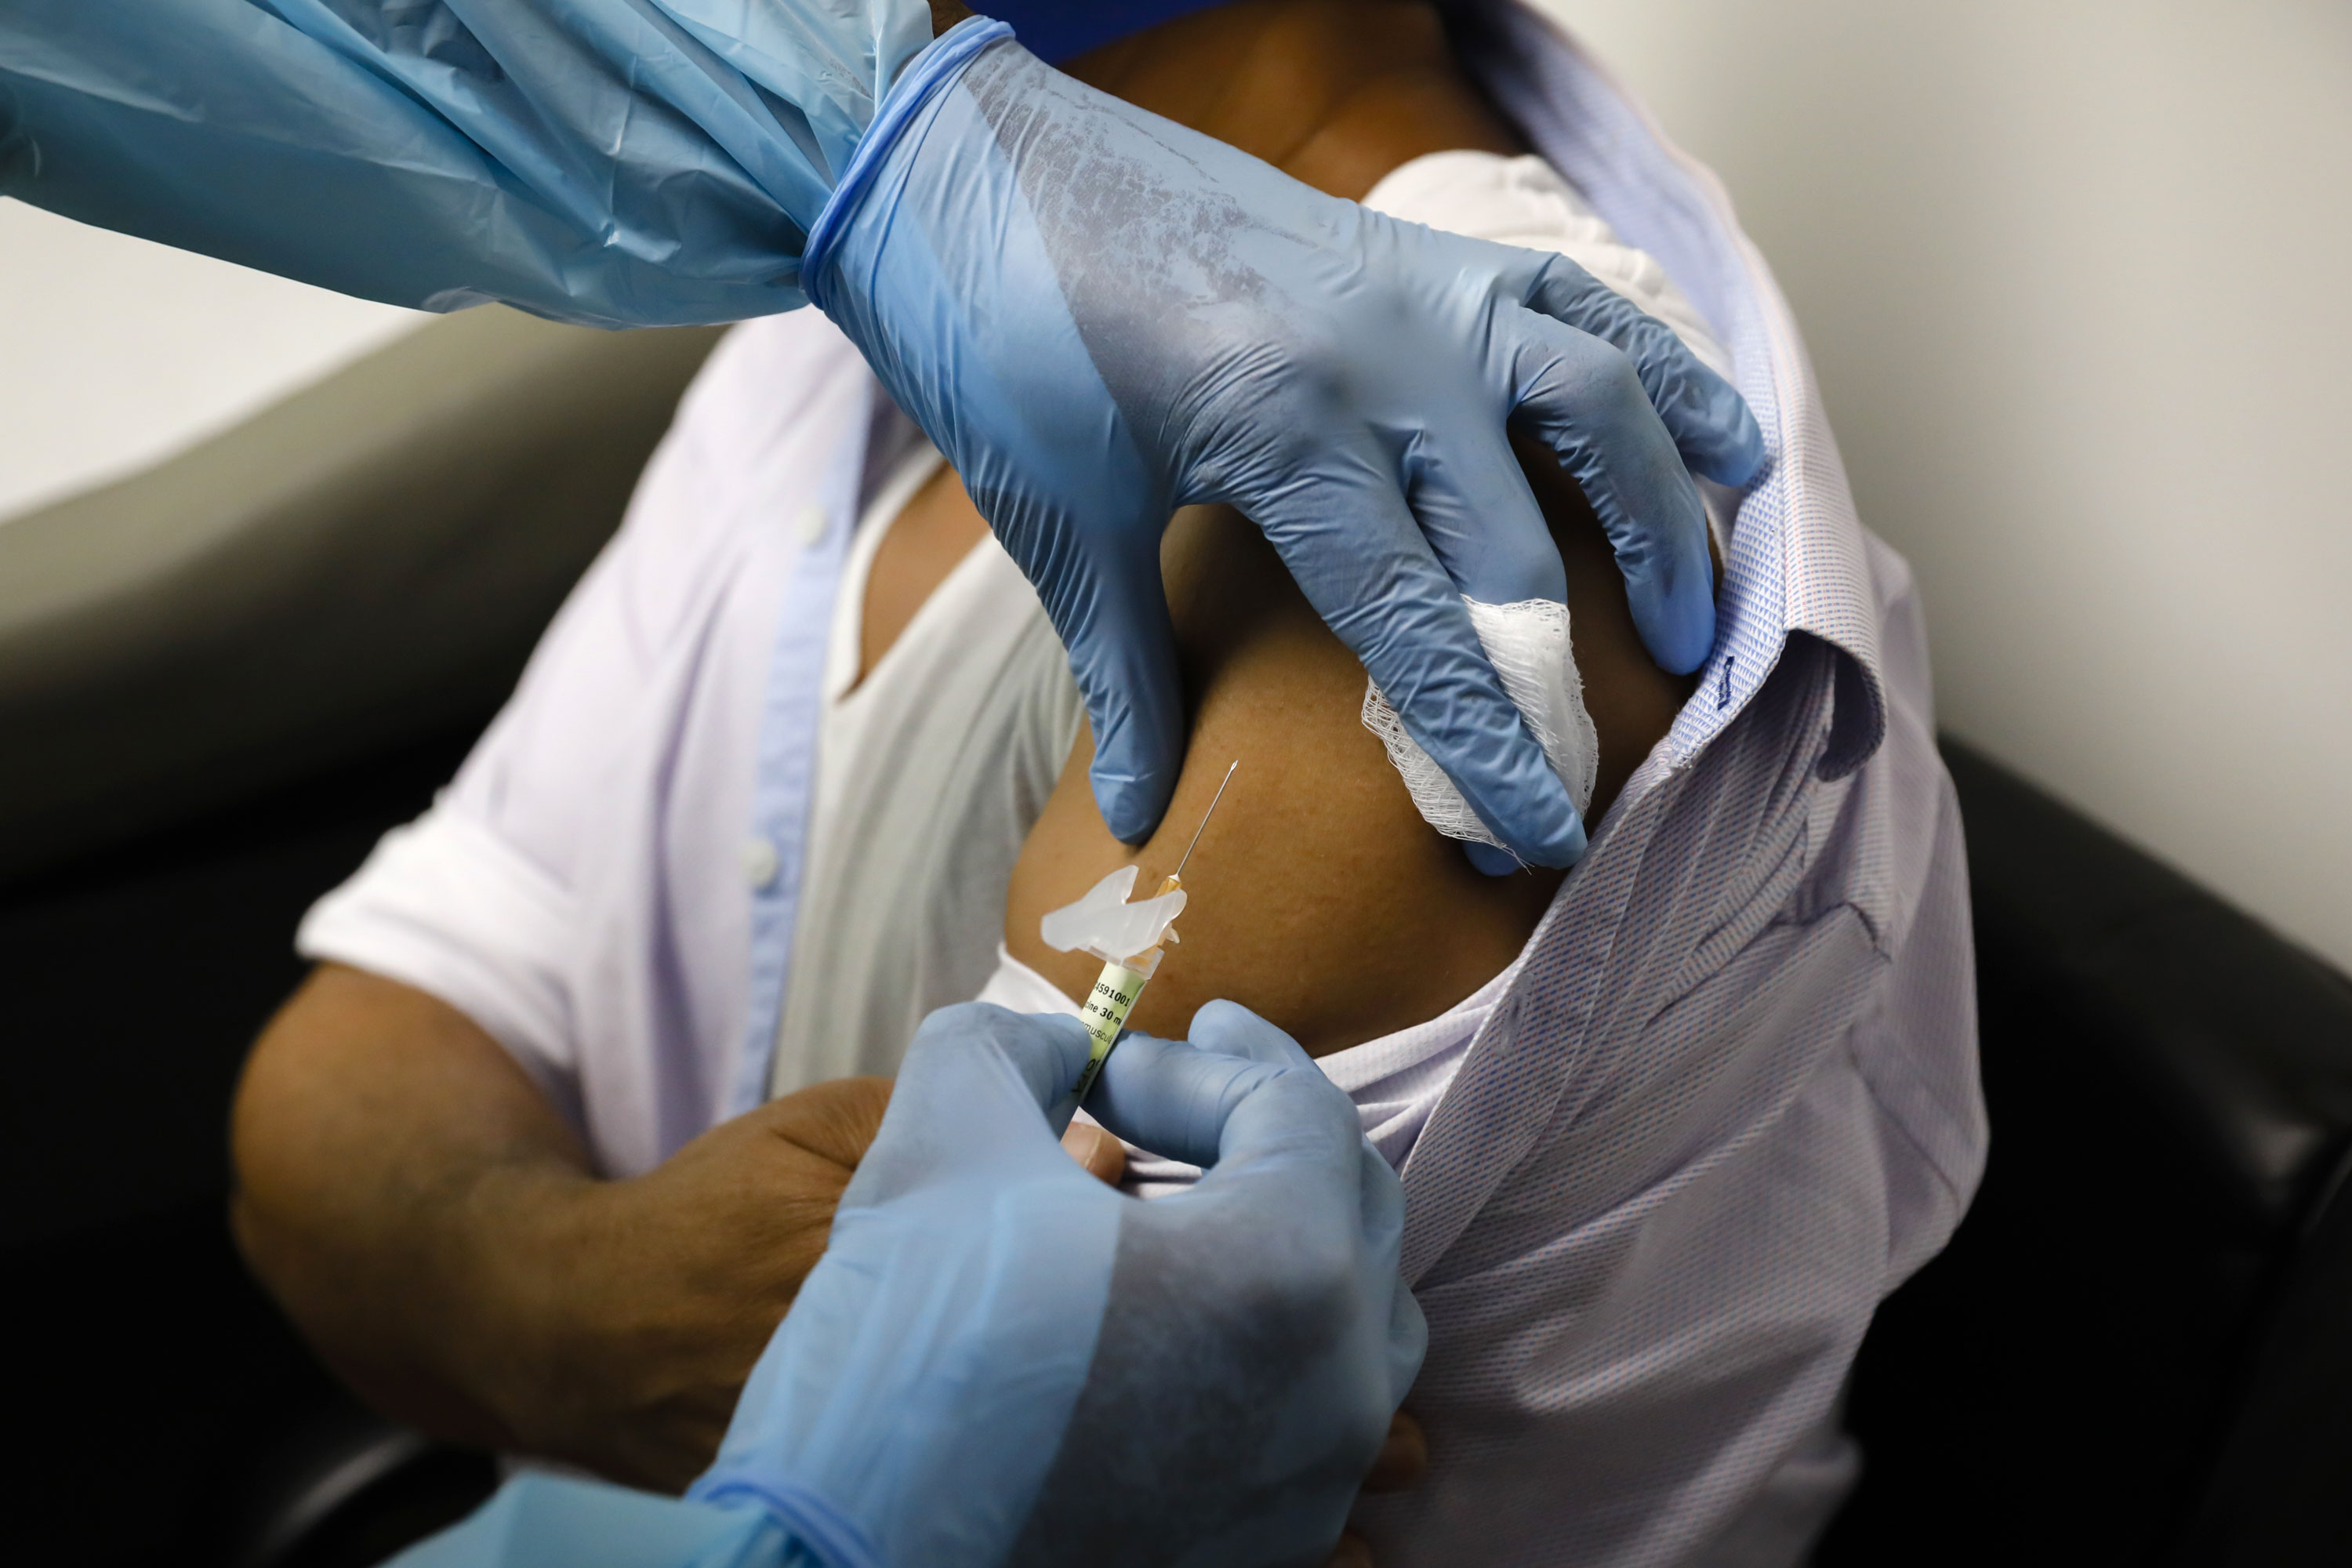 A health worker in Hollywood, Florida, injects a person during clinical trials for a Pfizer coronavirus vaccine on September 9.